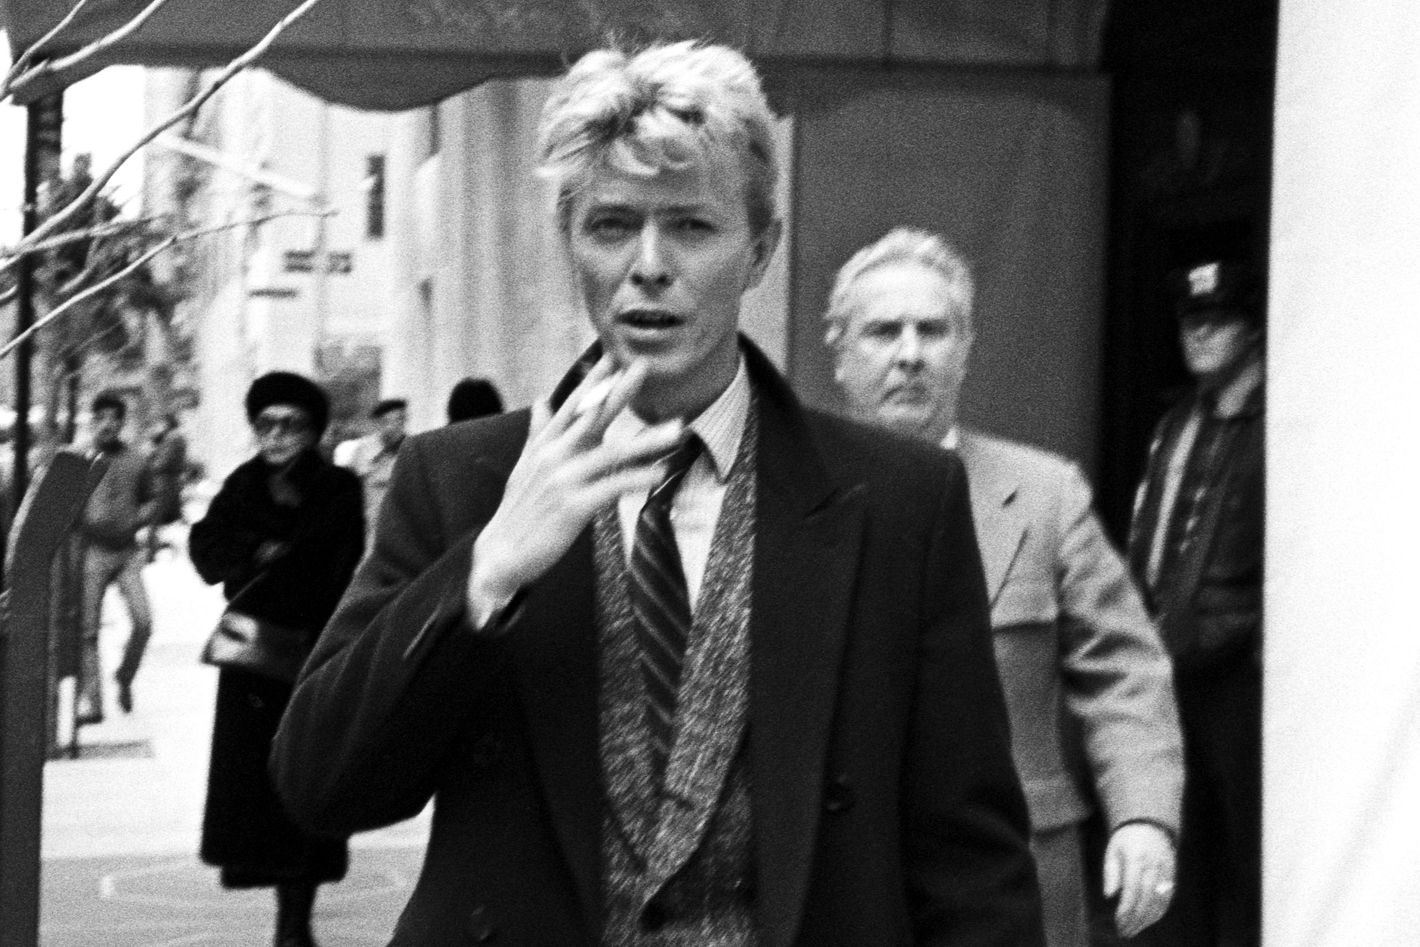 The Bowie You've Never Seen - The New York Times